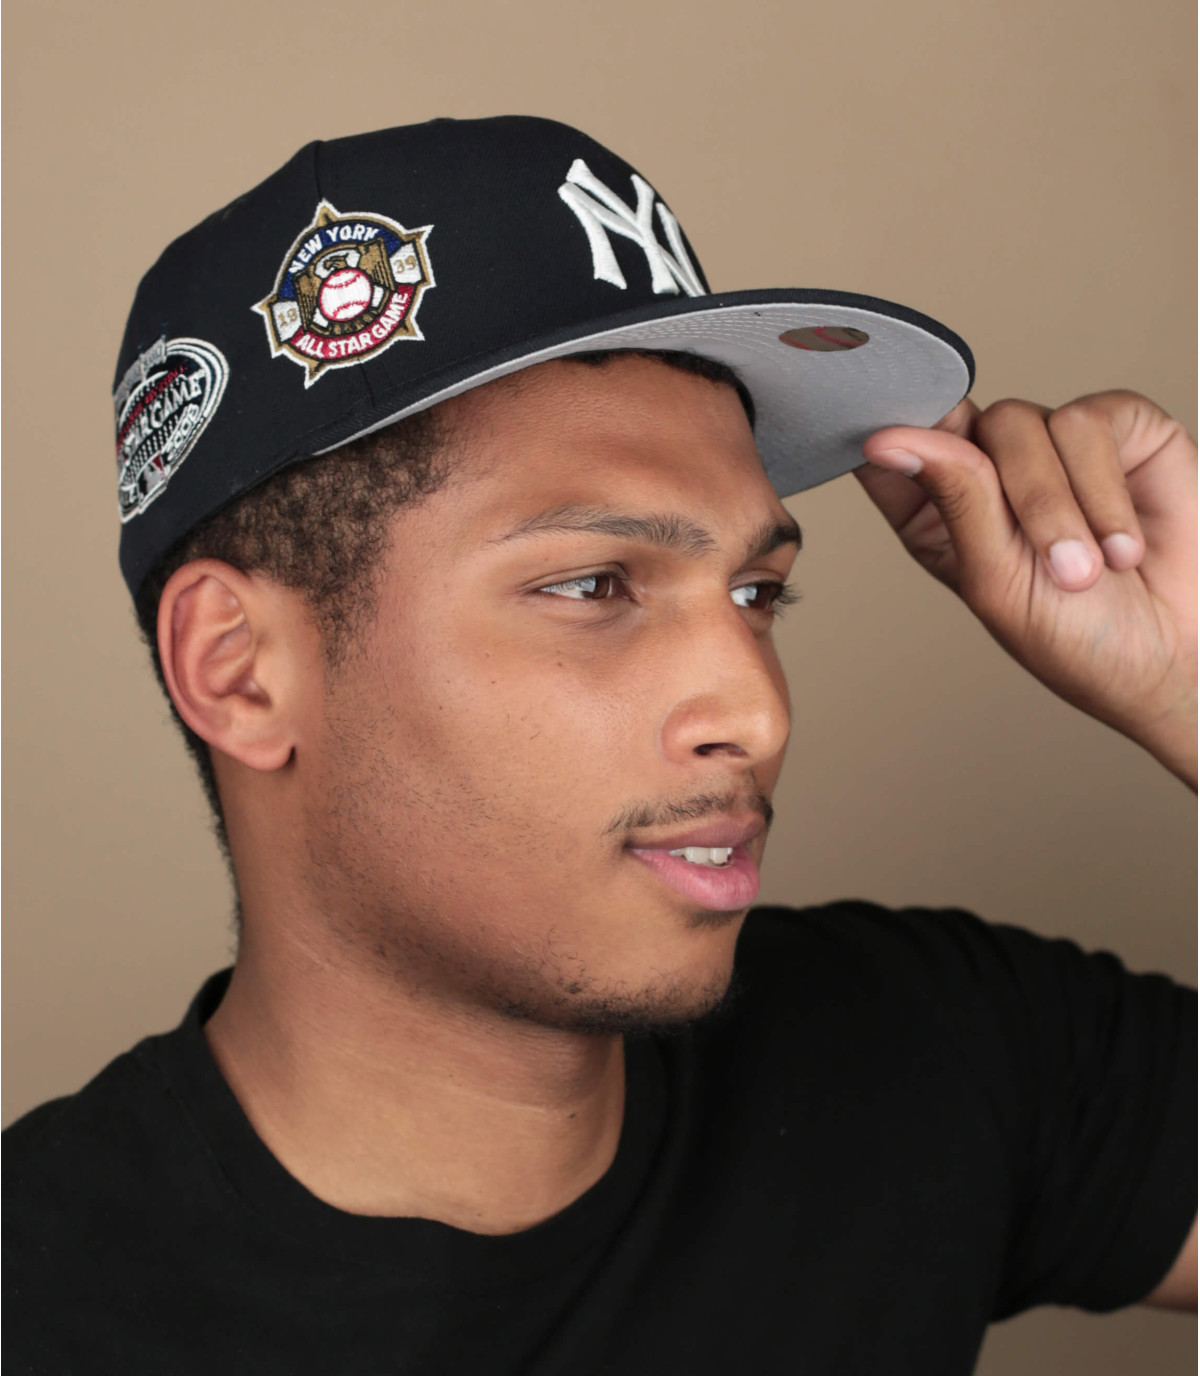 https://www.headict.es/46050-large_default/cooperstown-ny-multi-patch-59fifty.jpg